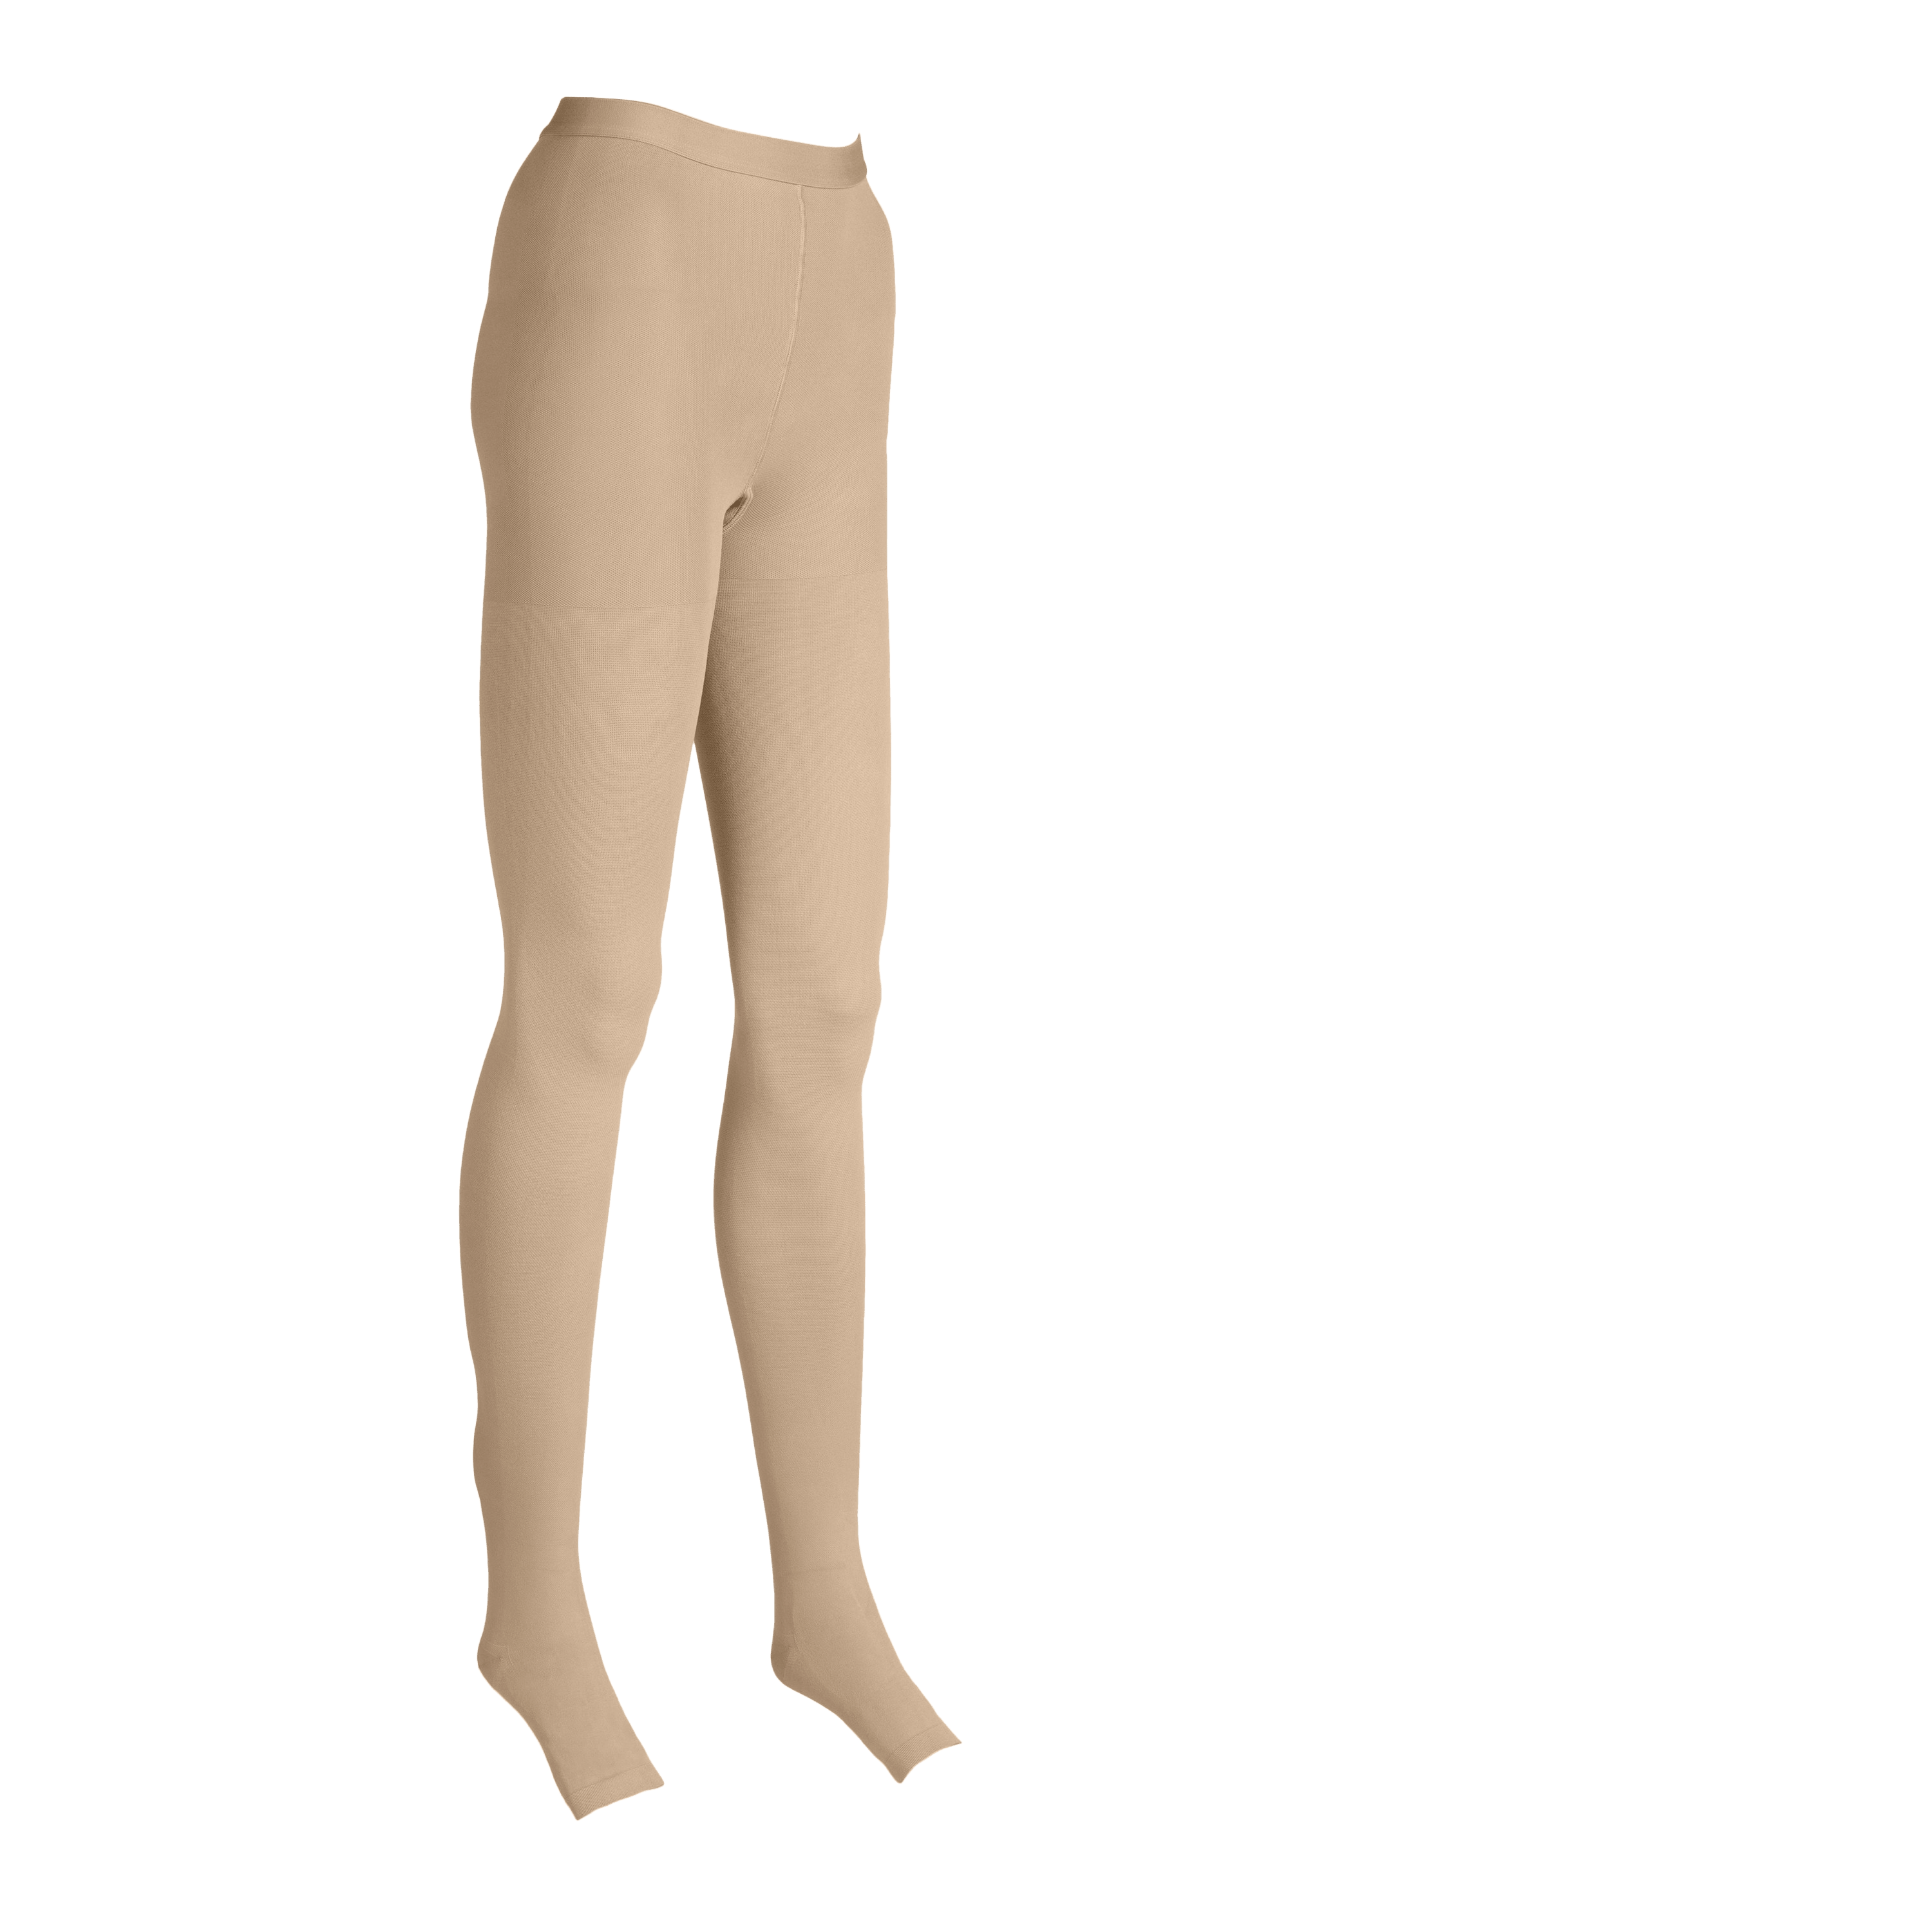 6XL Plus Size Support Tights 20-30mmHg for Saphenous Vein - Beige, 6X-Large